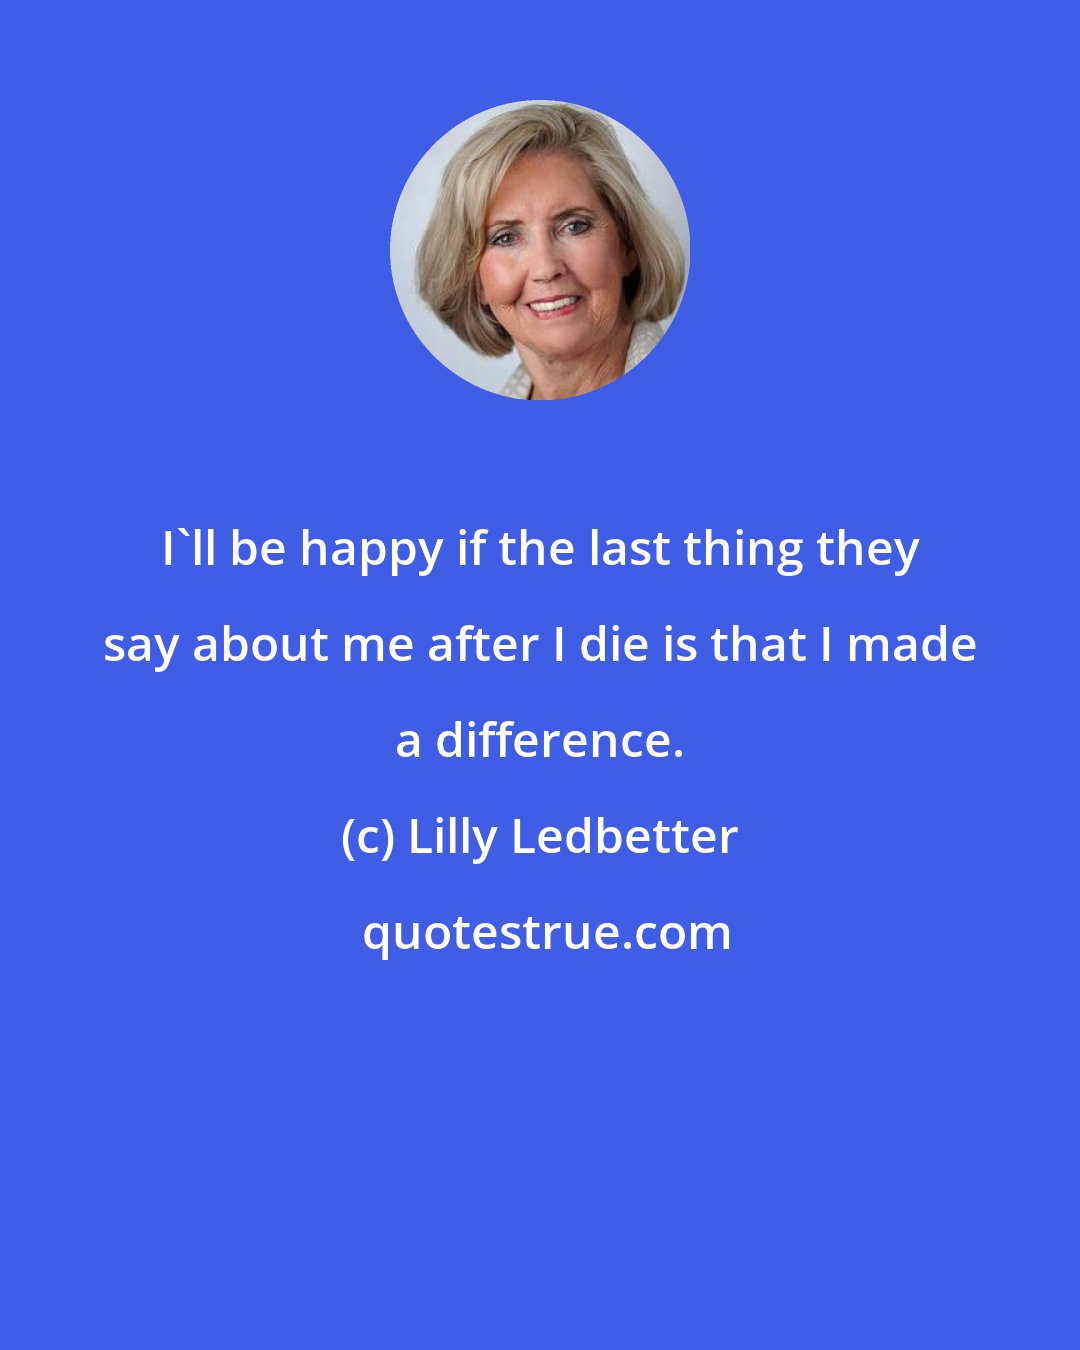 Lilly Ledbetter: I'll be happy if the last thing they say about me after I die is that I made a difference.